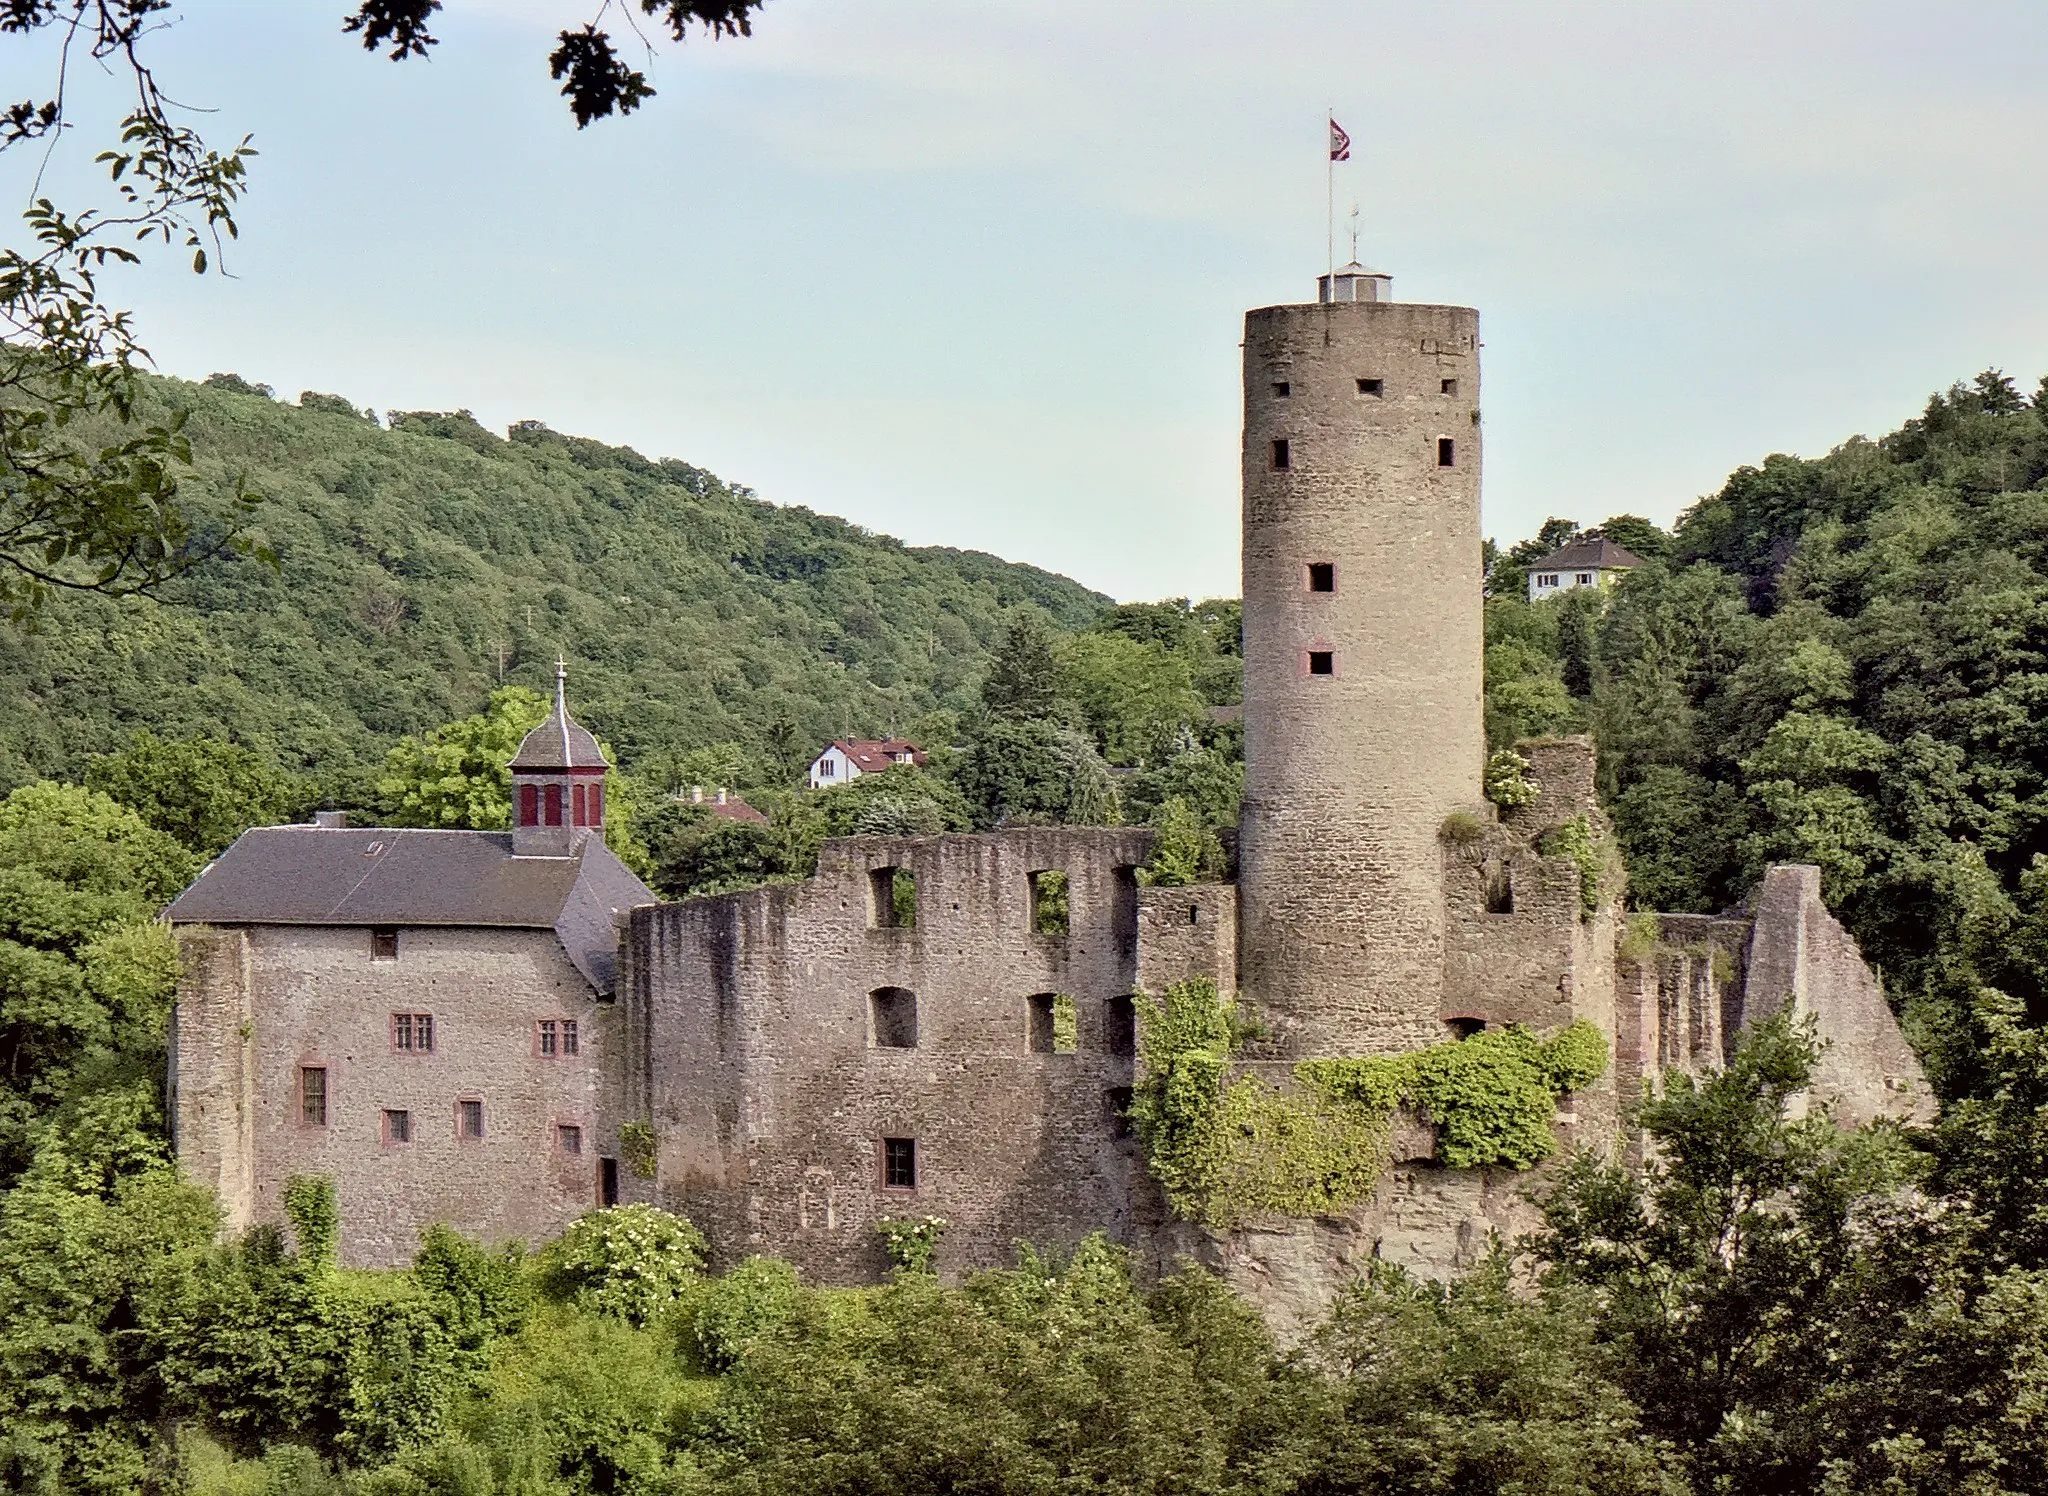 Photo showing: The Eppstein castle at Eppstein, Taunus, Germany. View from north-western direction.